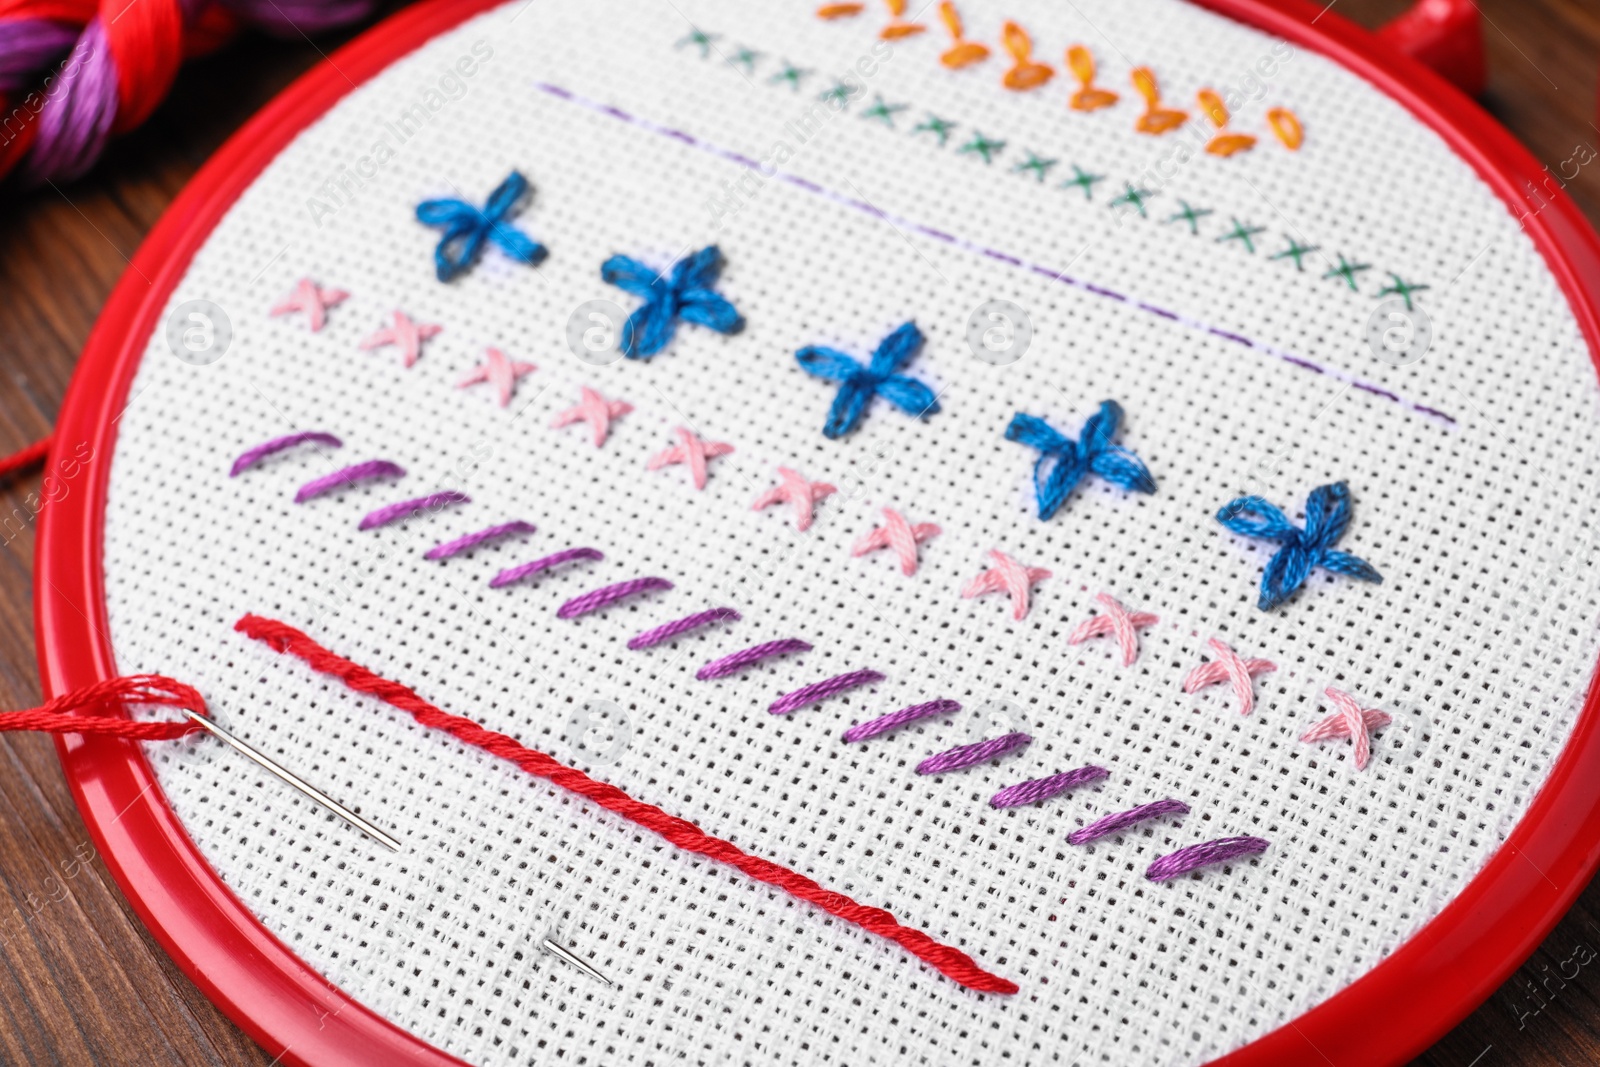 Photo of Fabric with colorful stitches and needle in embroidery hoop on wooden table, closeup